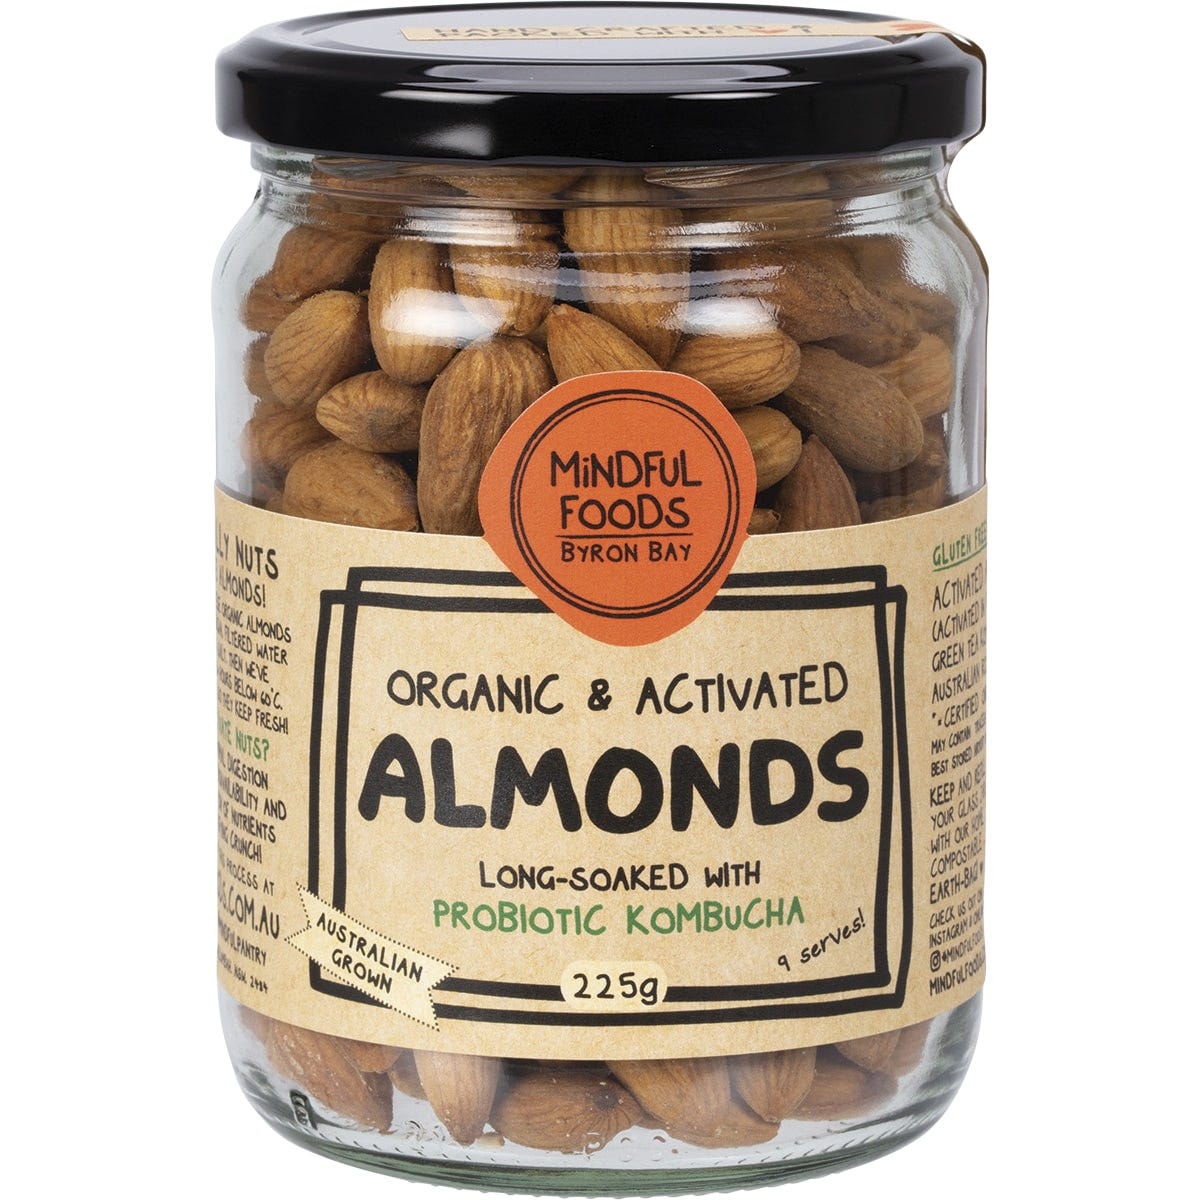 Almonds Organic & Activated